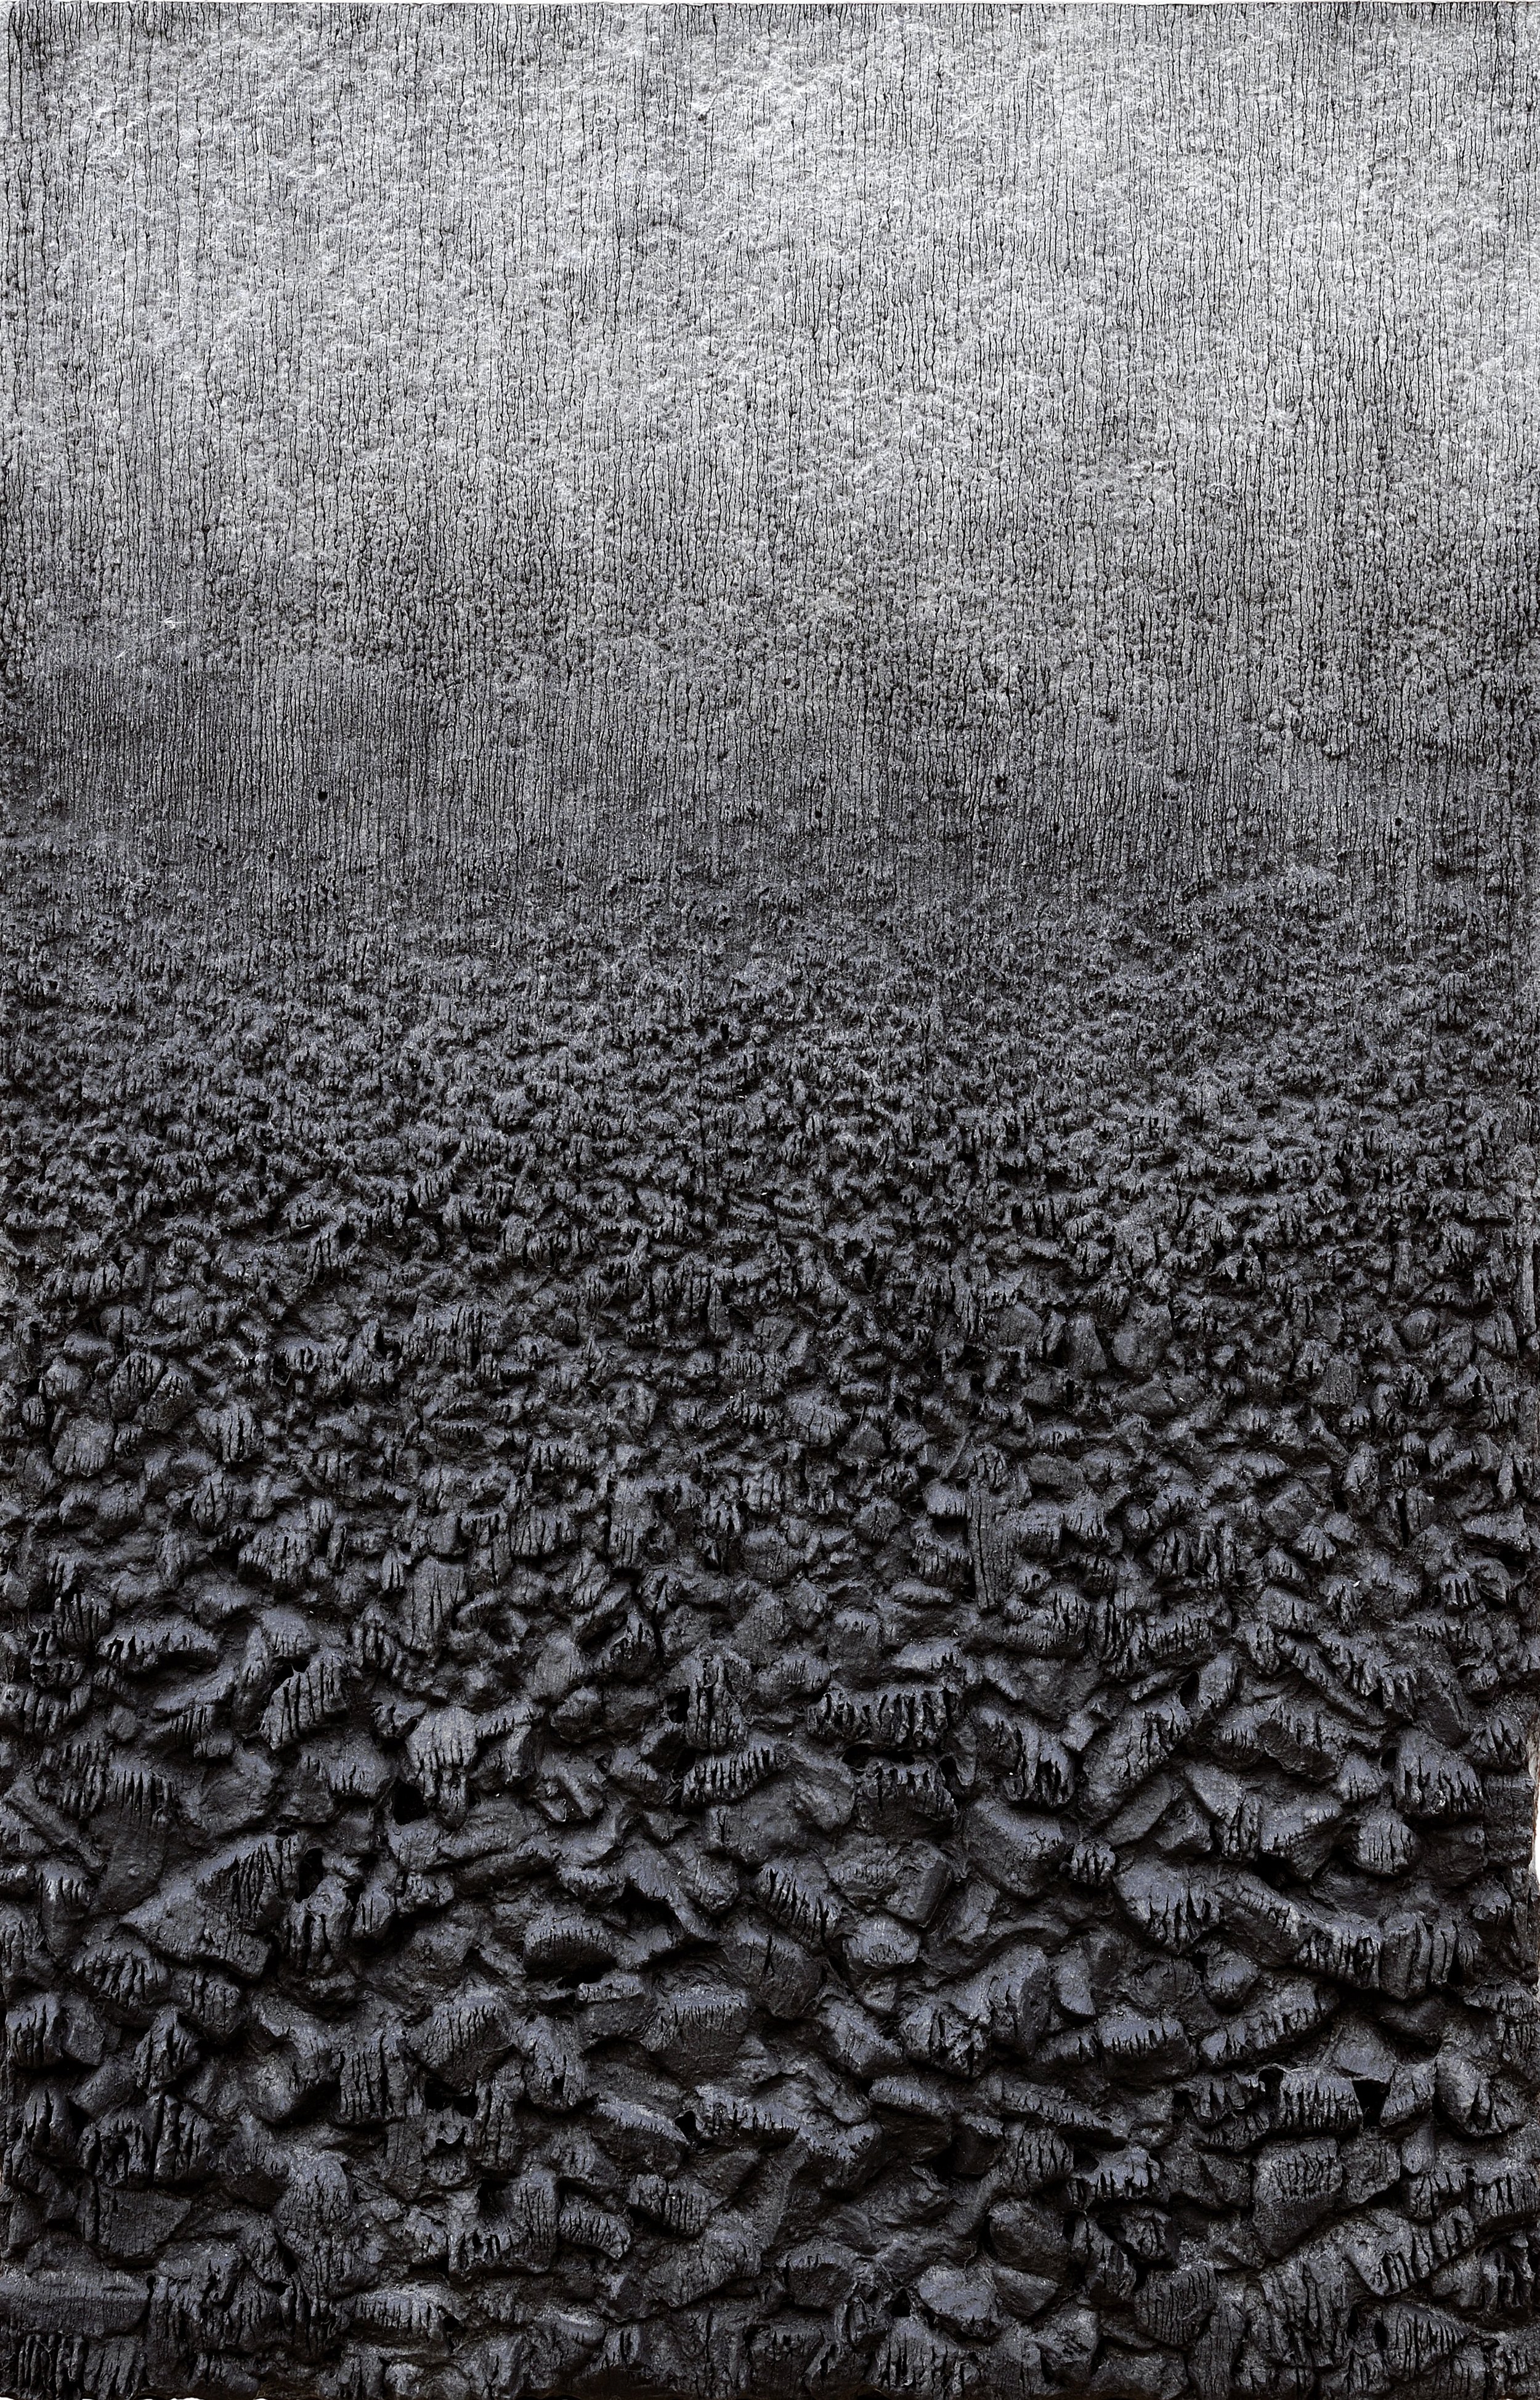 Lee Jin Woo, Untitled (10), 2018, charcoal and pigments on Hanji paper, 80x51cm, detail.